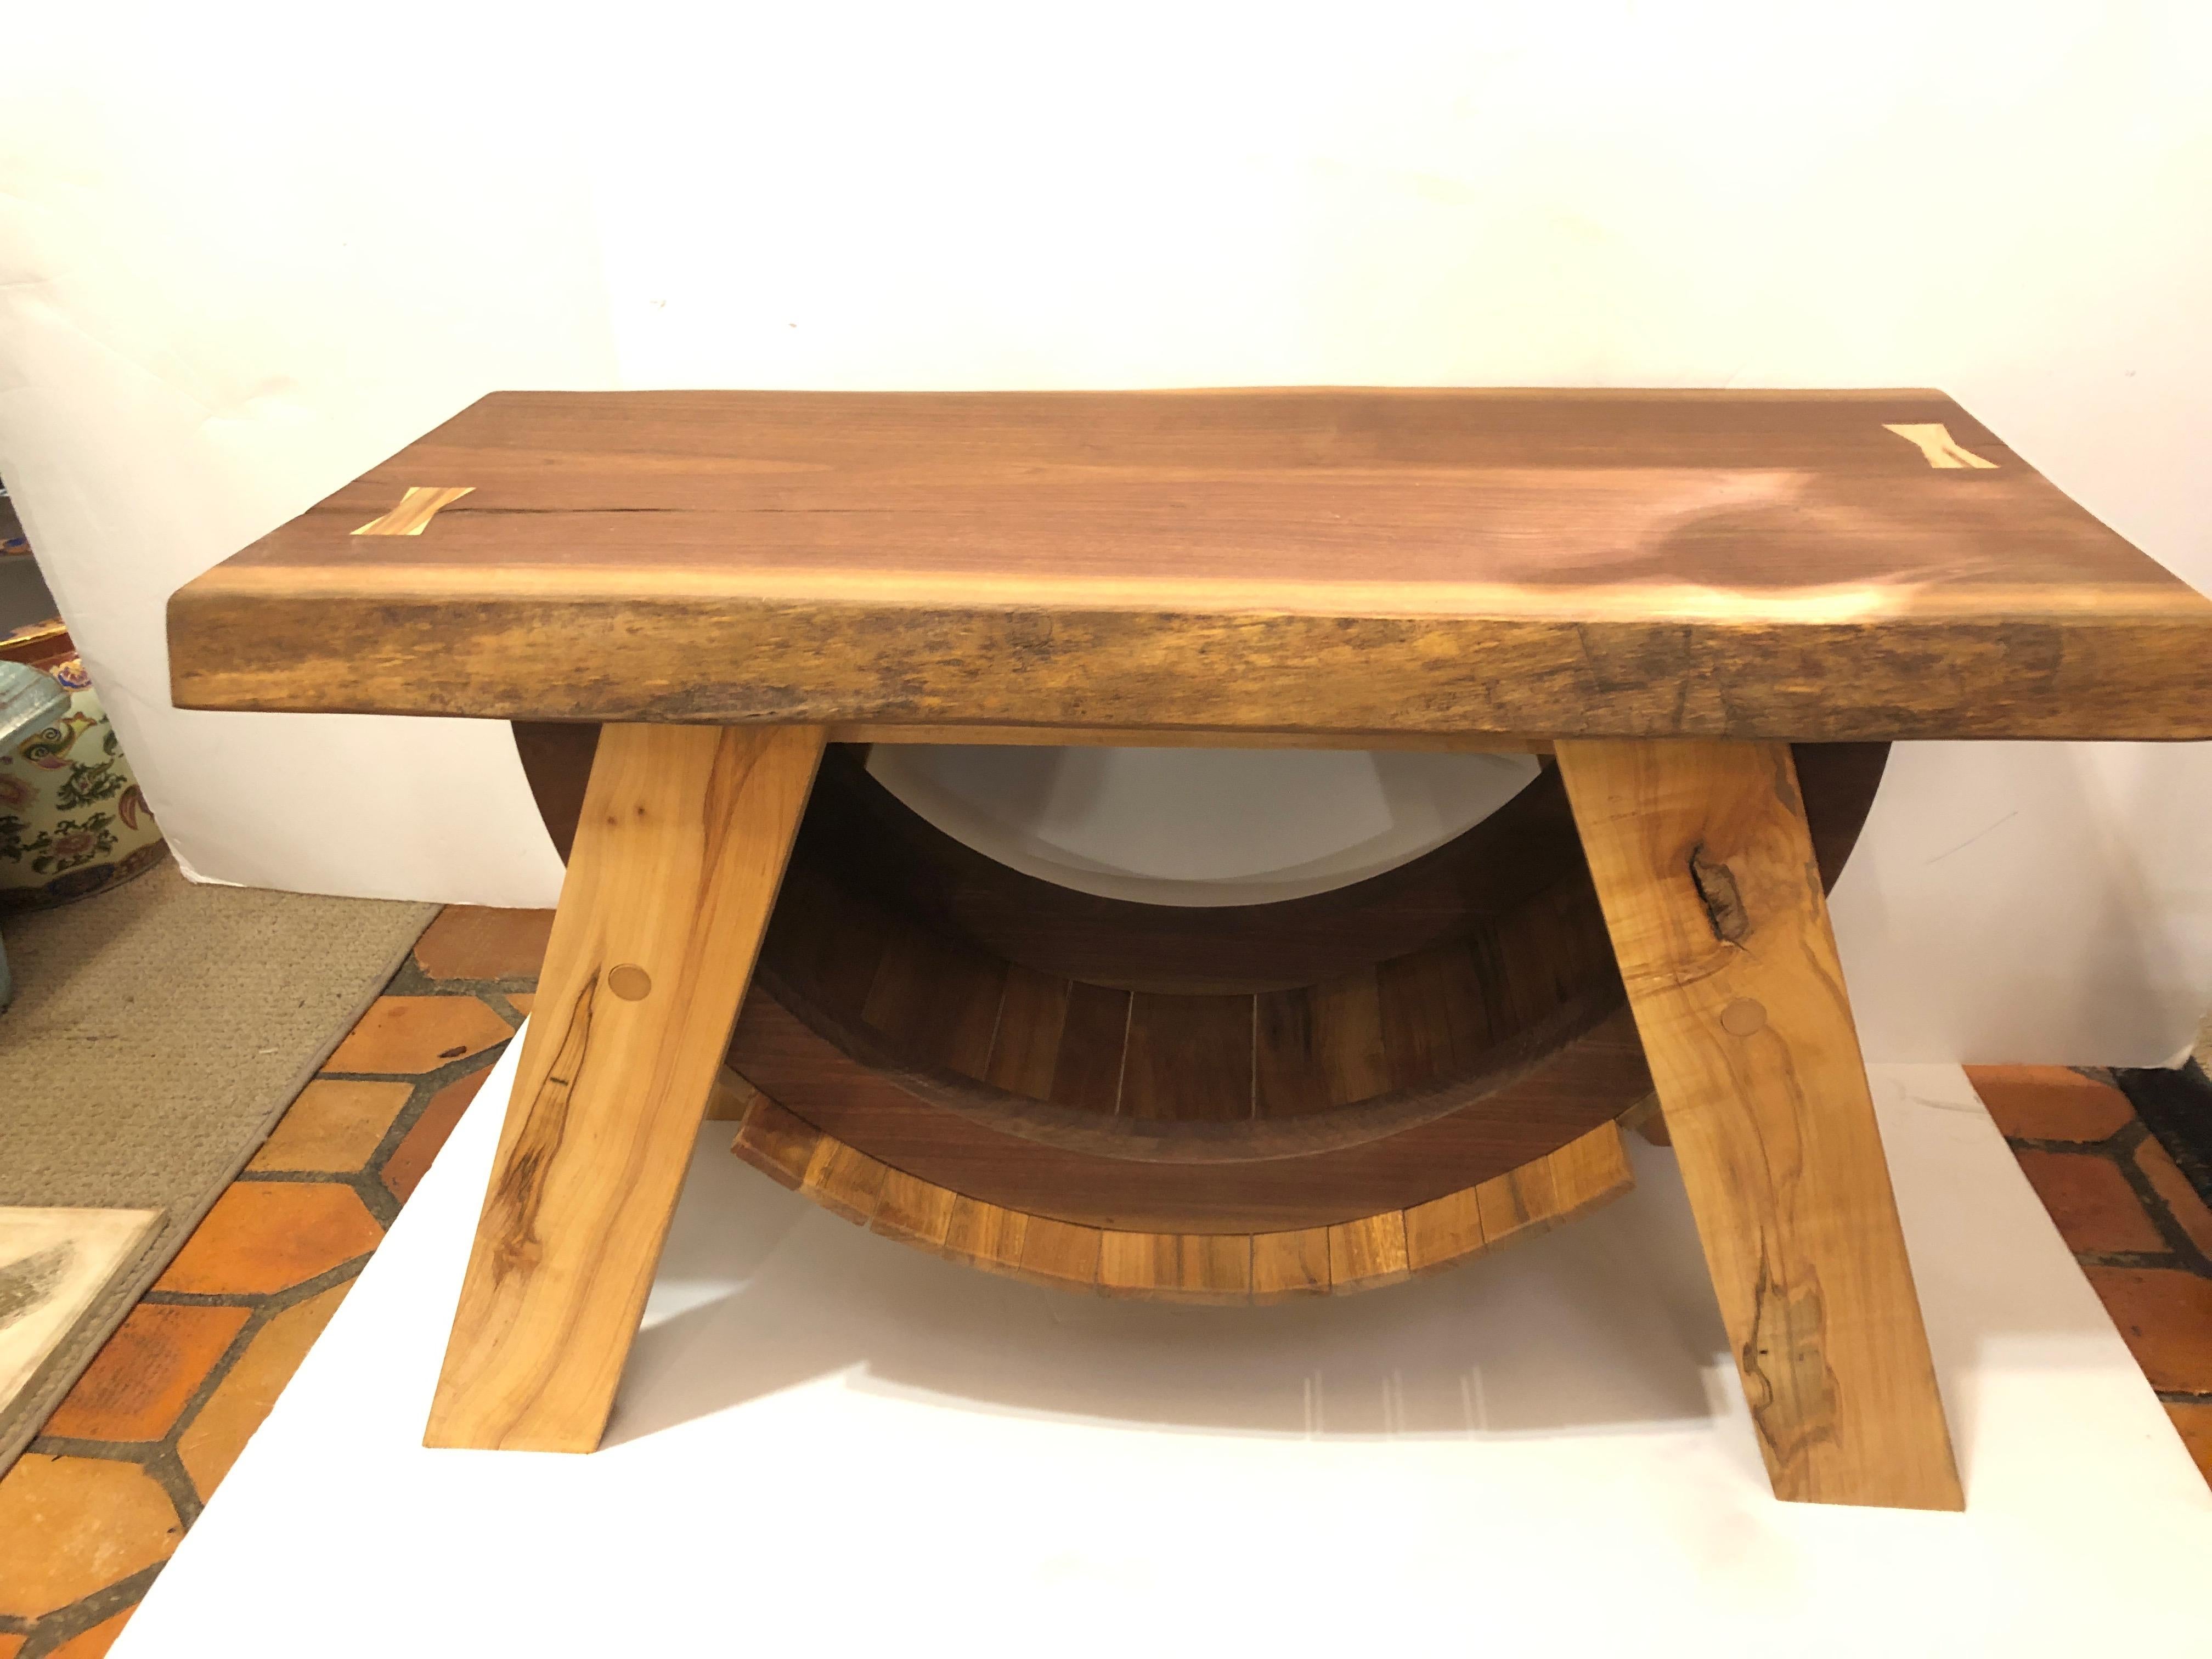 A great looking handcrafted live edge wooden slab end table or bench by Amish craftsman Mervin Fisher.